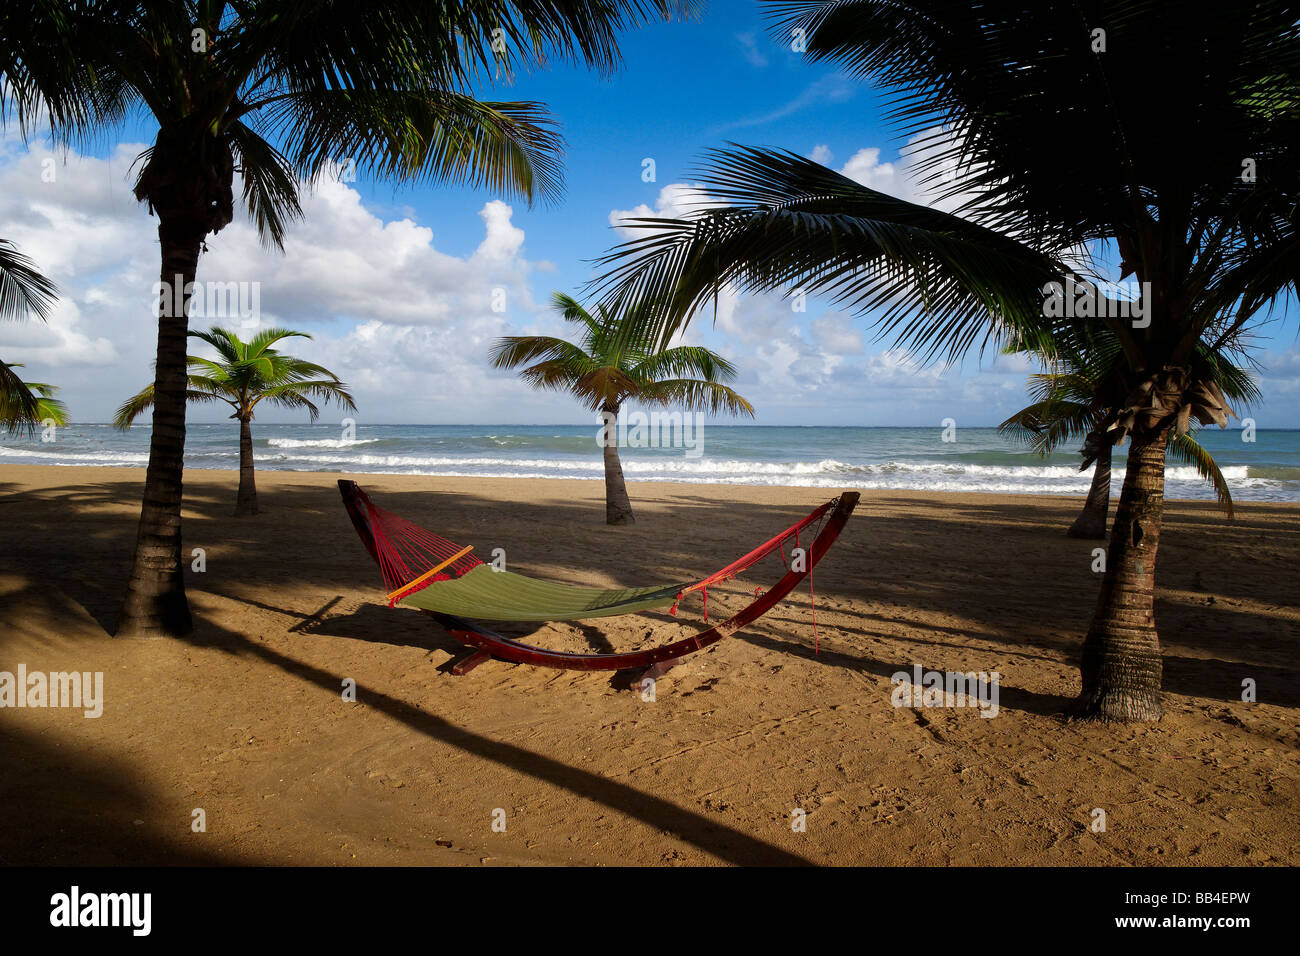 View of a Hammock on a Palm Covered Beach Isla Verde Puerto Rico Stock Photo